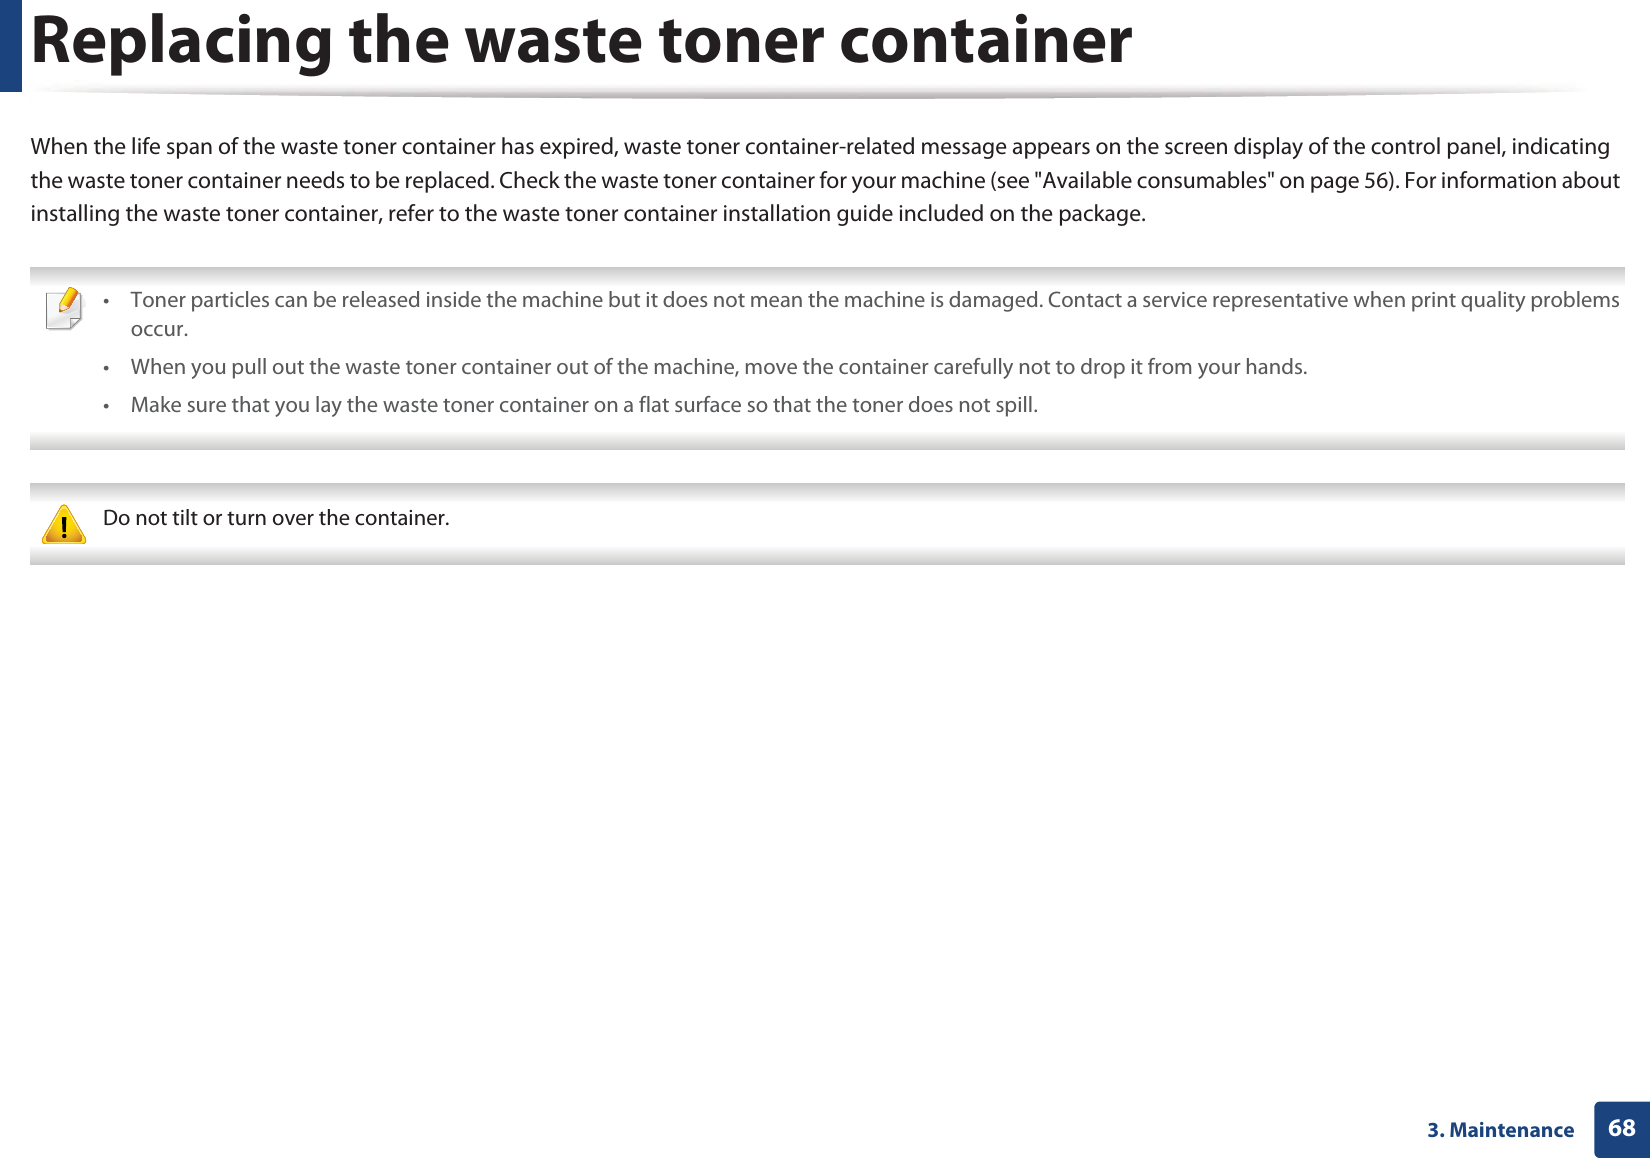 683. MaintenanceReplacing the waste toner containerWhen the life span of the waste toner container has expired, waste toner container-related message appears on the screen display of the control panel, indicating the waste toner container needs to be replaced. Check the waste toner container for your machine (see &quot;Available consumables&quot; on page 56). For information about installing the waste toner container, refer to the waste toner container installation guide included on the package. • Toner particles can be released inside the machine but it does not mean the machine is damaged. Contact a service representative when print quality problems occur.• When you pull out the waste toner container out of the machine, move the container carefully not to drop it from your hands.• Make sure that you lay the waste toner container on a flat surface so that the toner does not spill.  Do not tilt or turn over the container. 